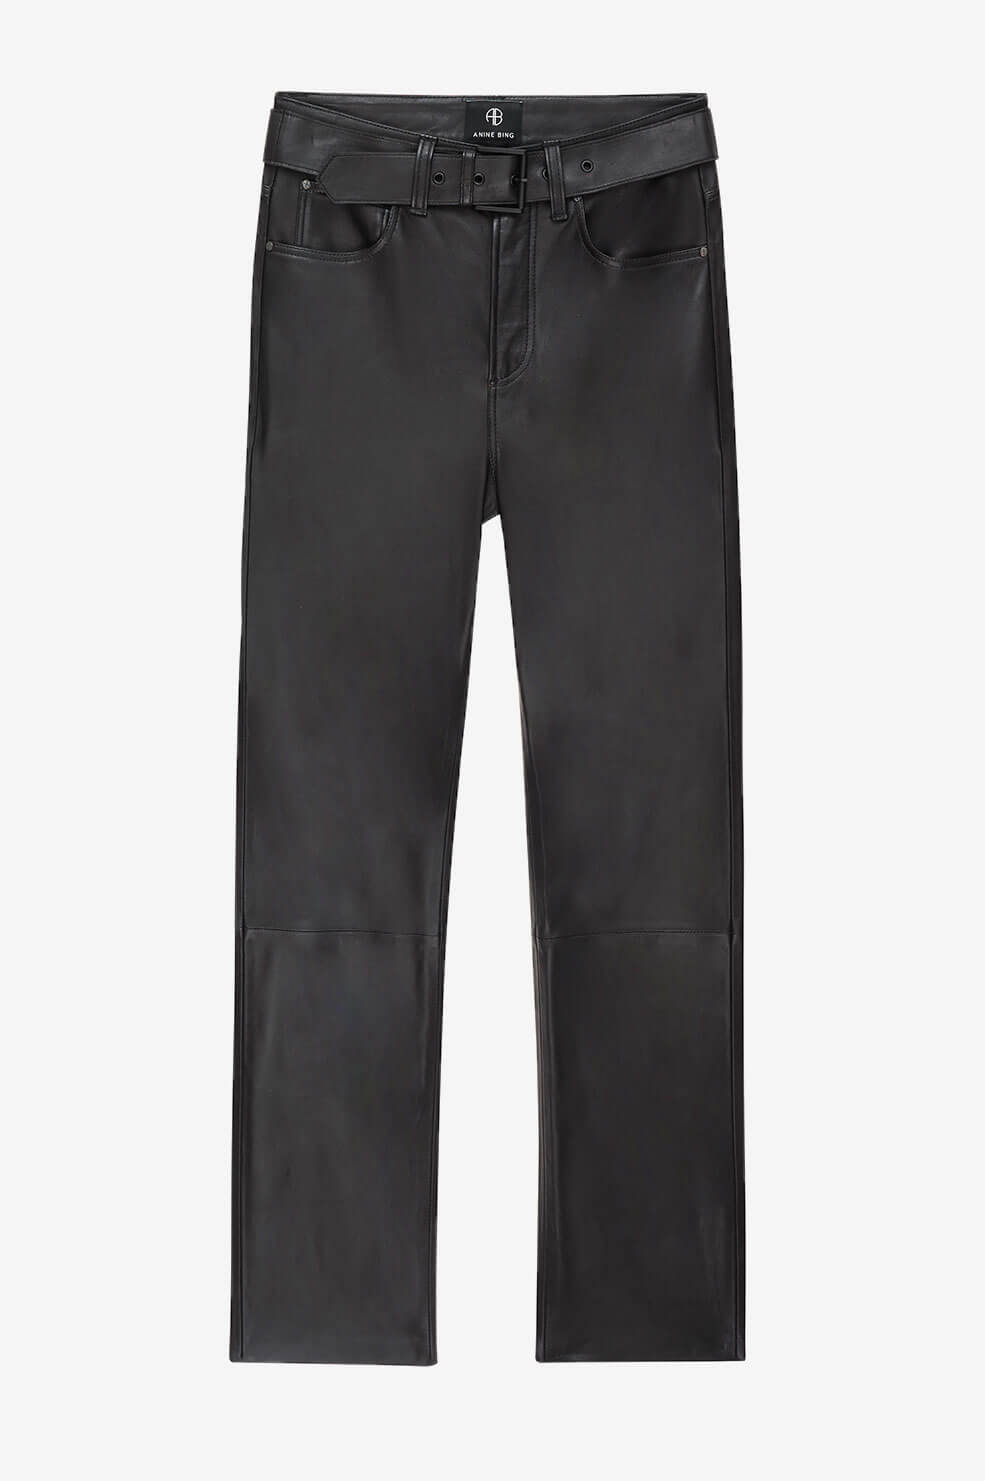 ANINE BING Connor Pant - Black - Front View